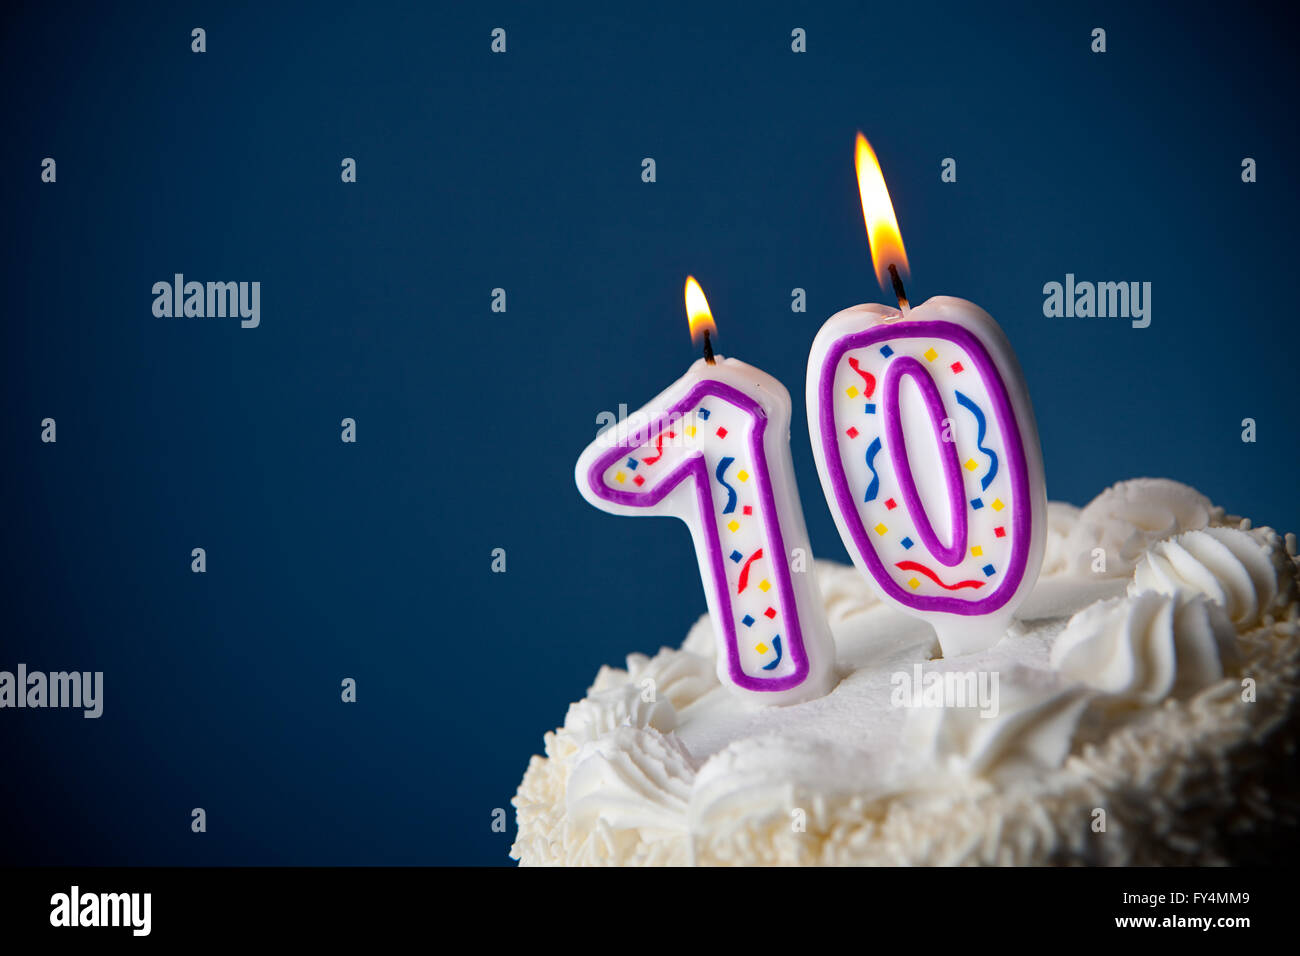 White iced cake on blue background with candles to celebrate various birthdays. Stock Photo